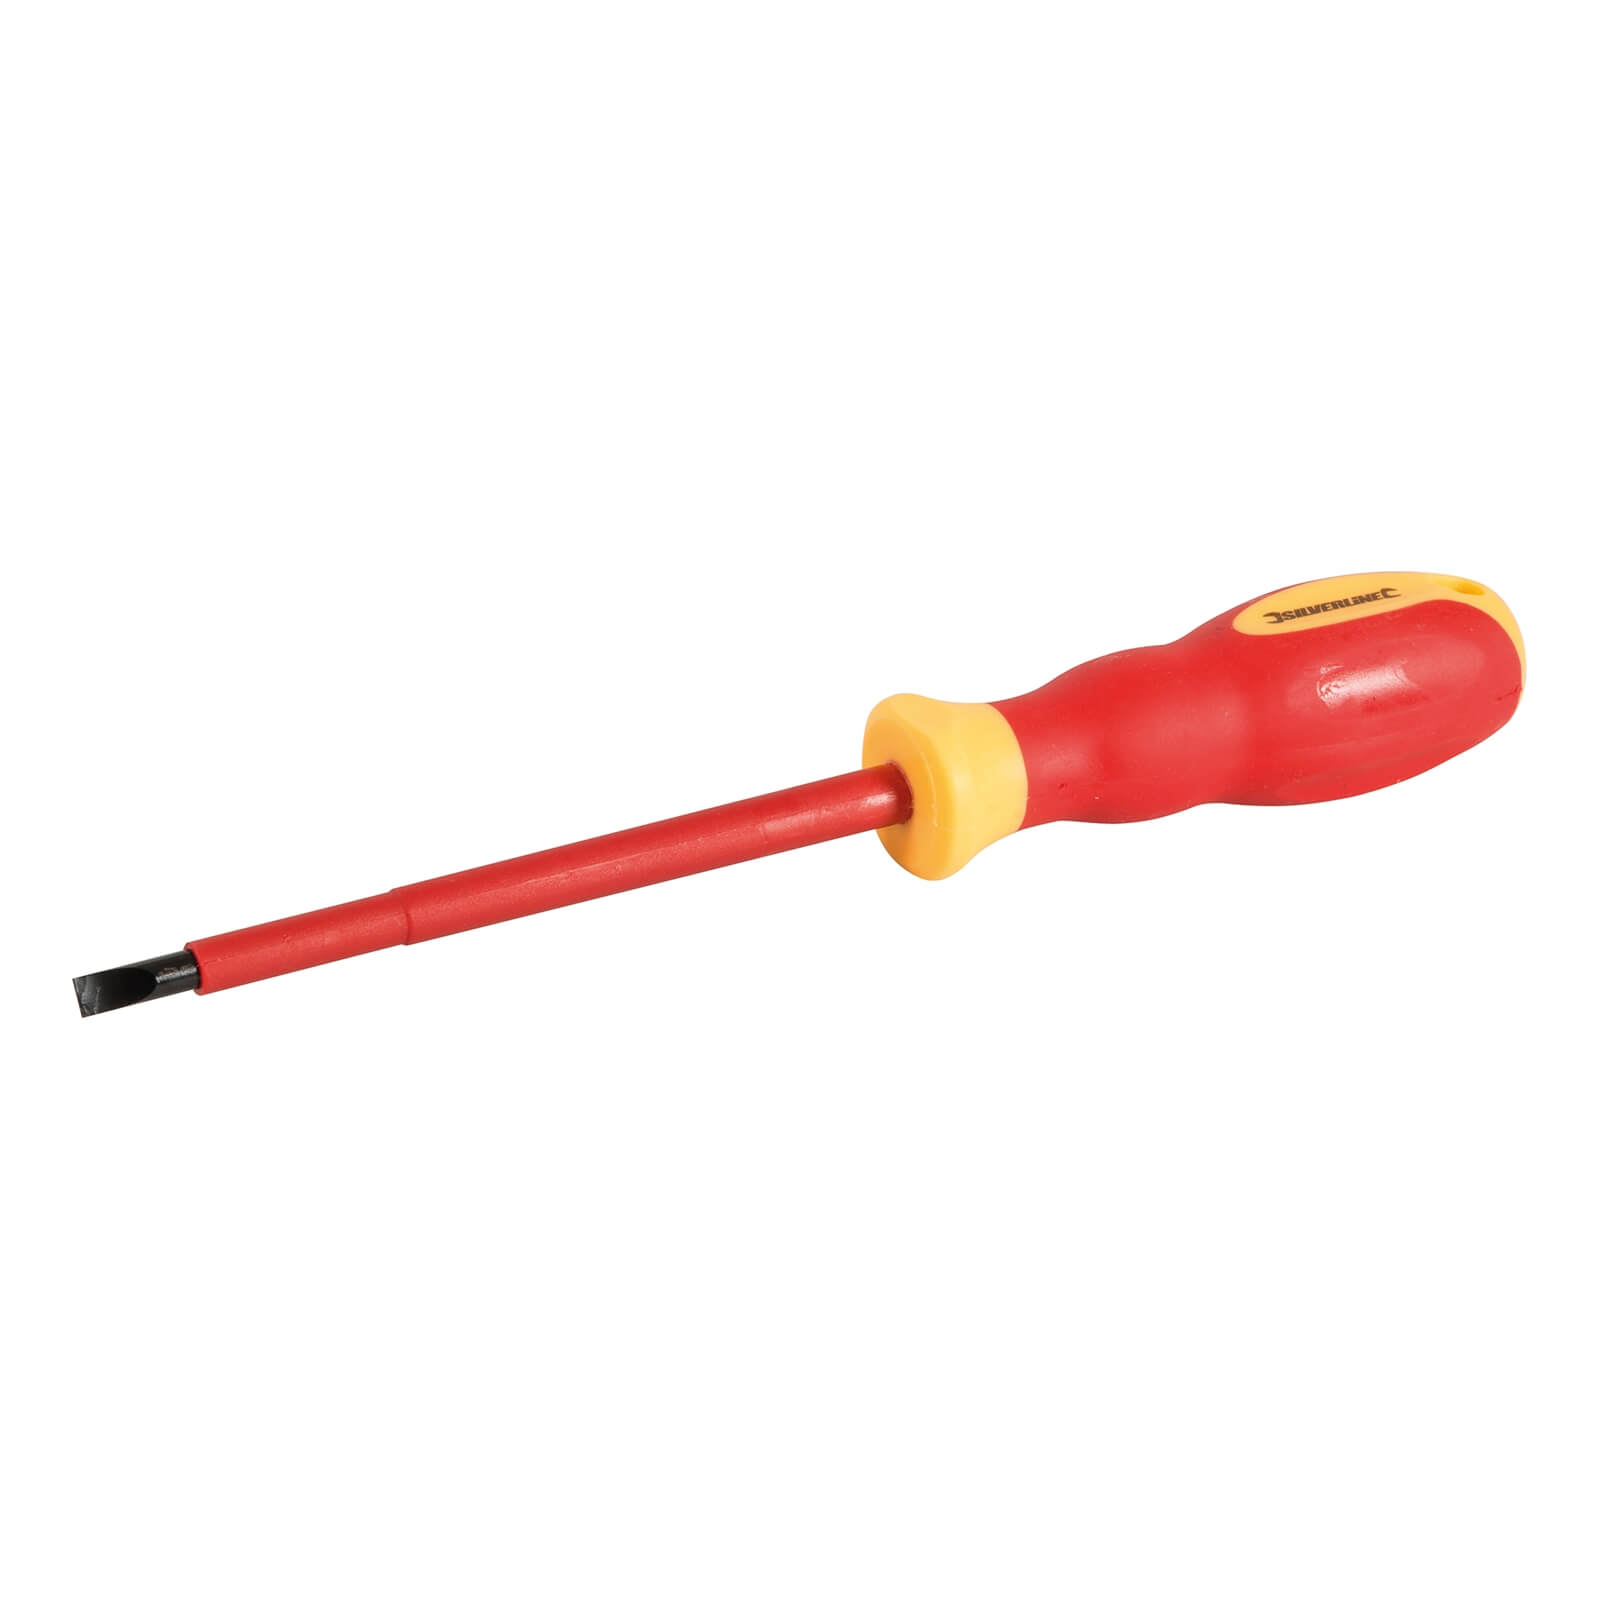 Silverline VDE Soft-Grip Electricians Screwdriver Slotted 1.0 x 5.5 x 125mm